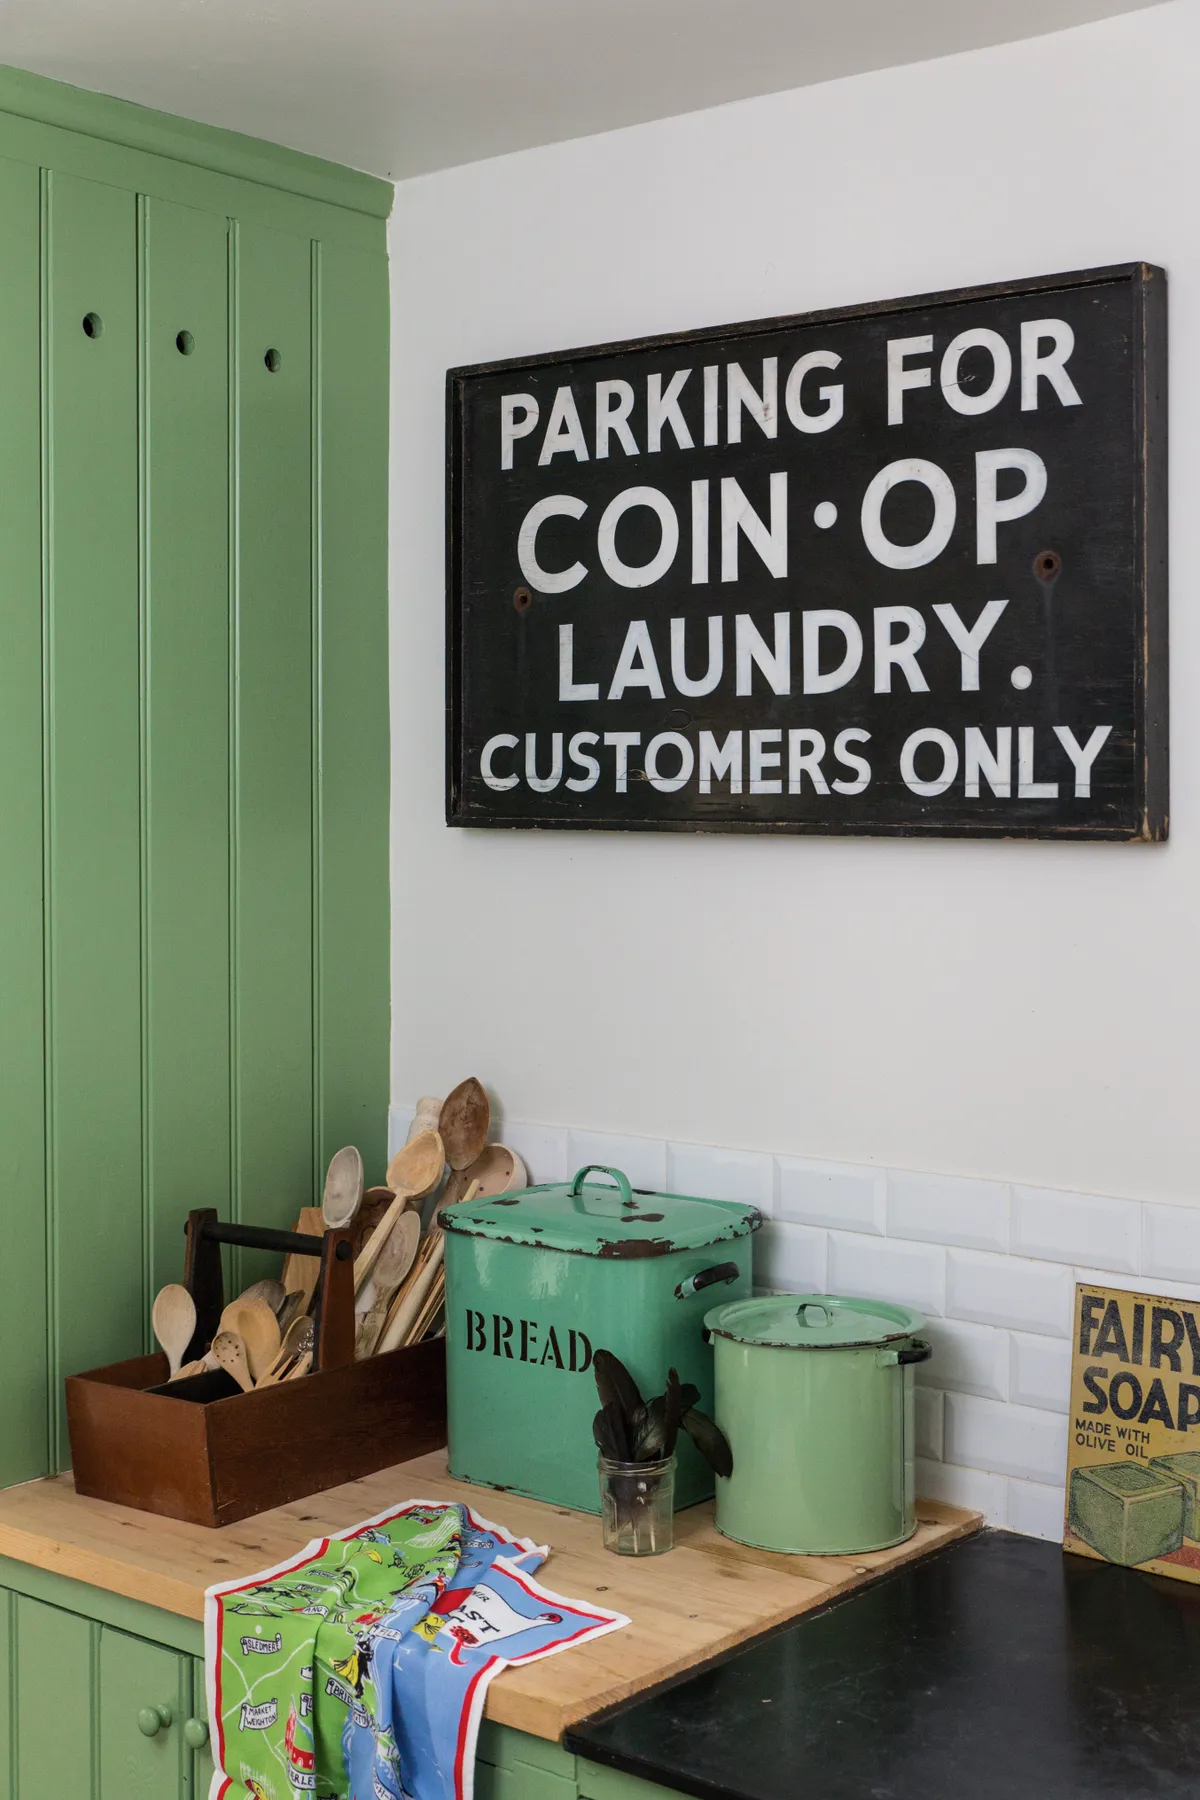 RE often has a good selection of vintage advertising signs, from £80 to £200.